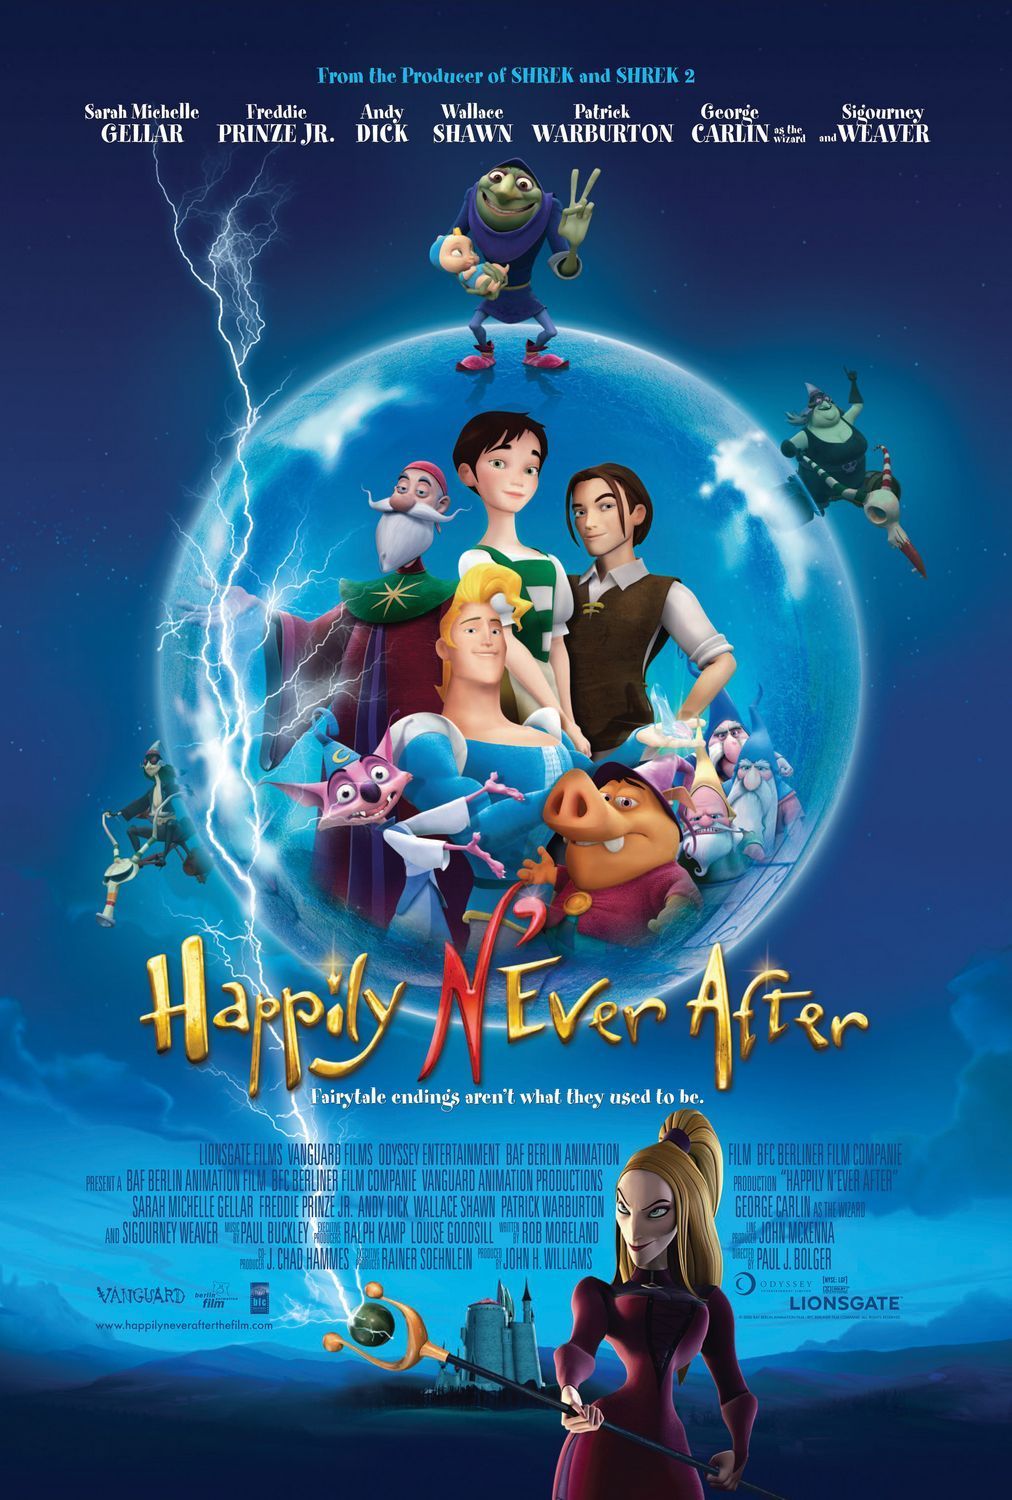 Happily N'ever After posters